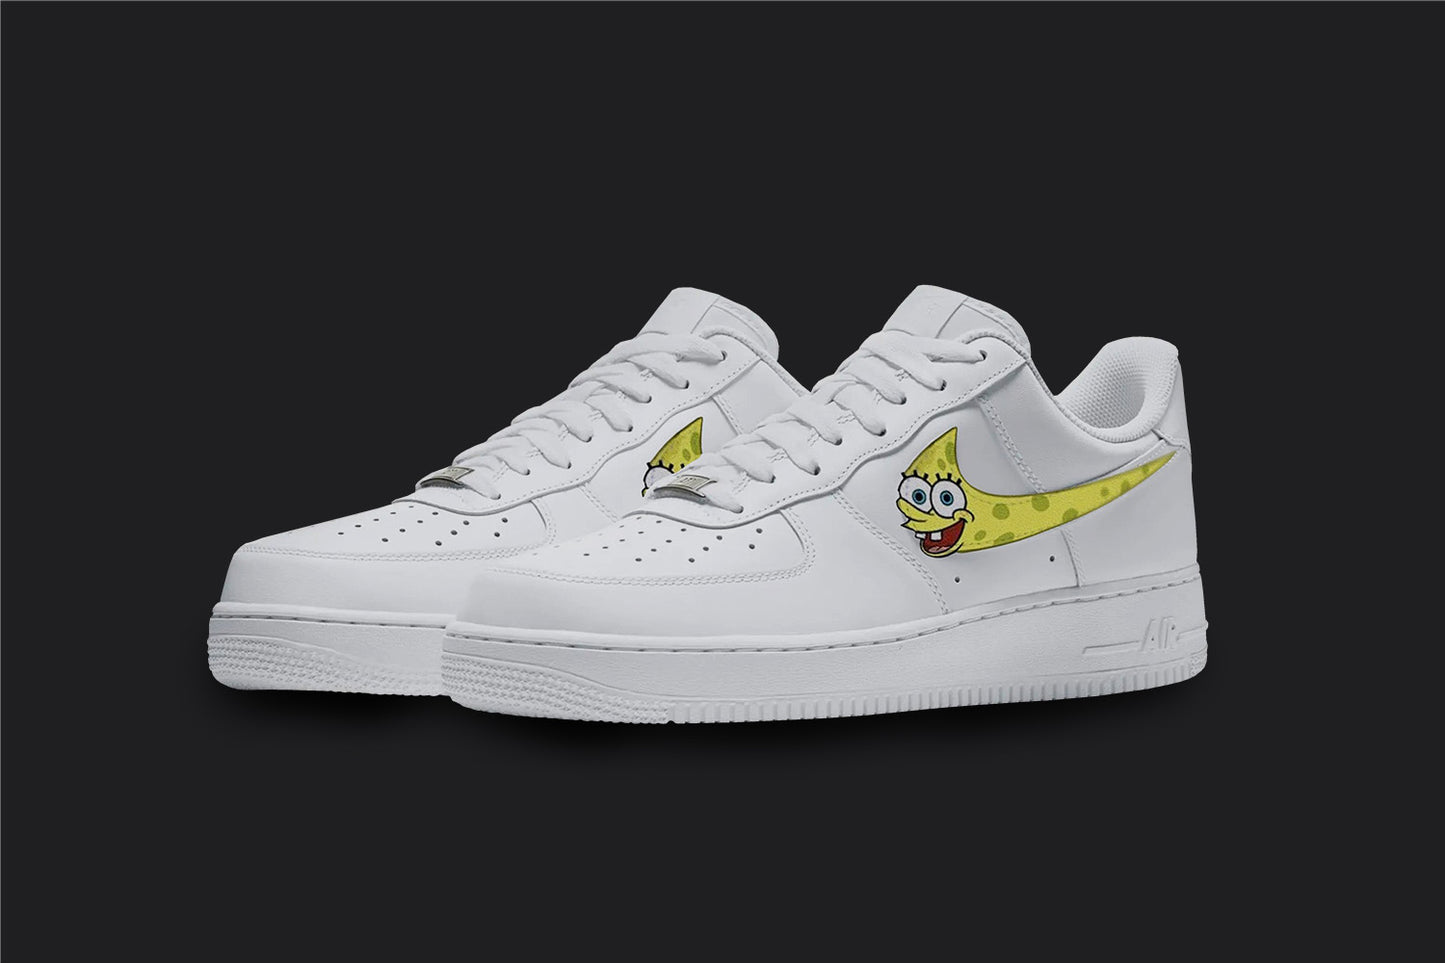 The image is of a Custom Nike Air force 1 sneaker pair on a blank black background. The custom sneaker pair has a spongebob design on the nike logo.